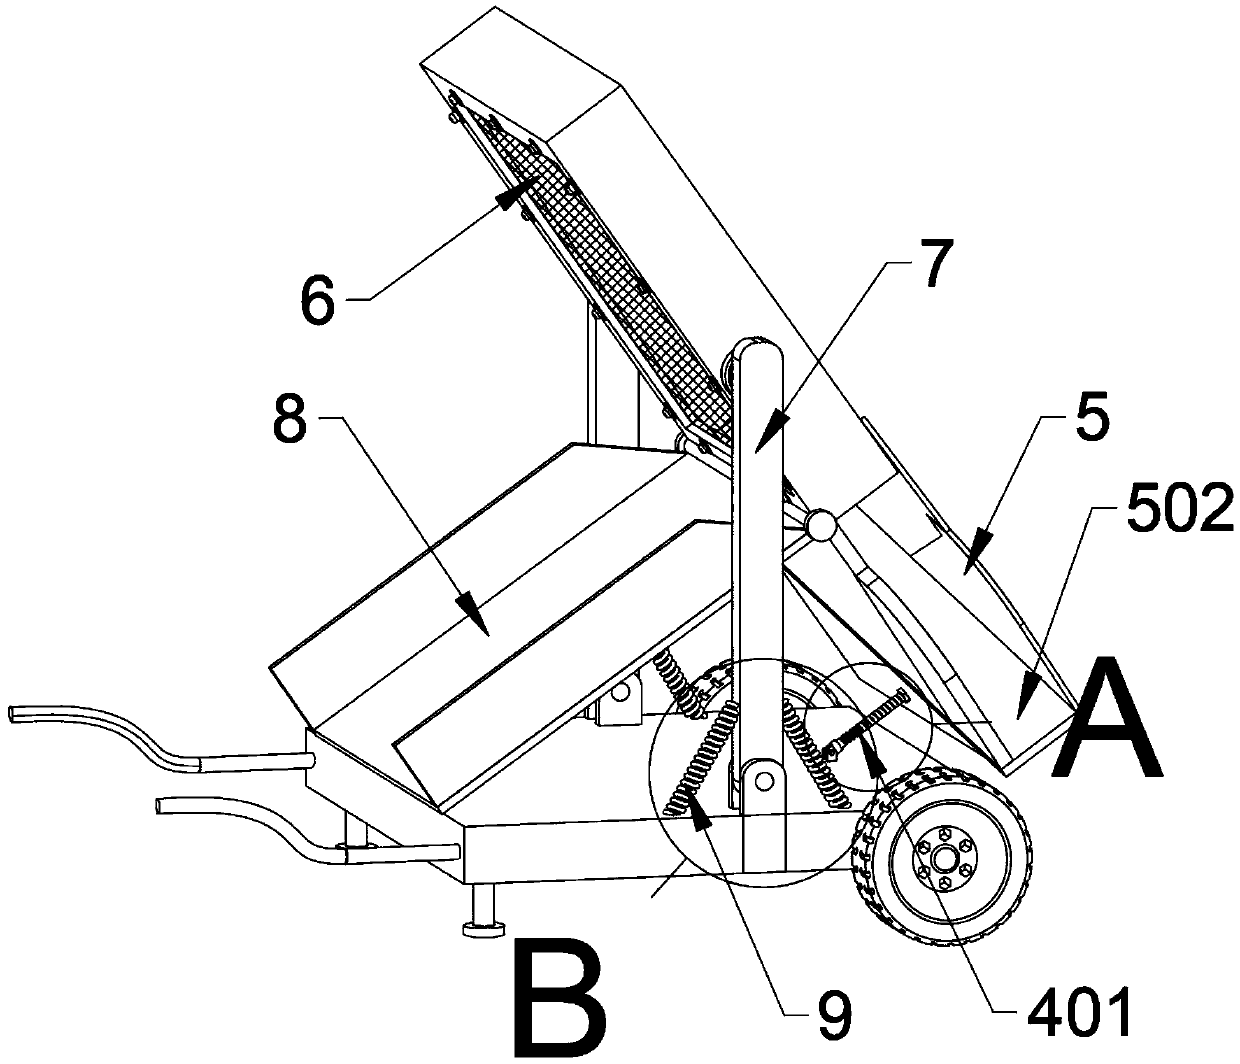 Adjustable inclined sand screening device for constructional engineering site construction